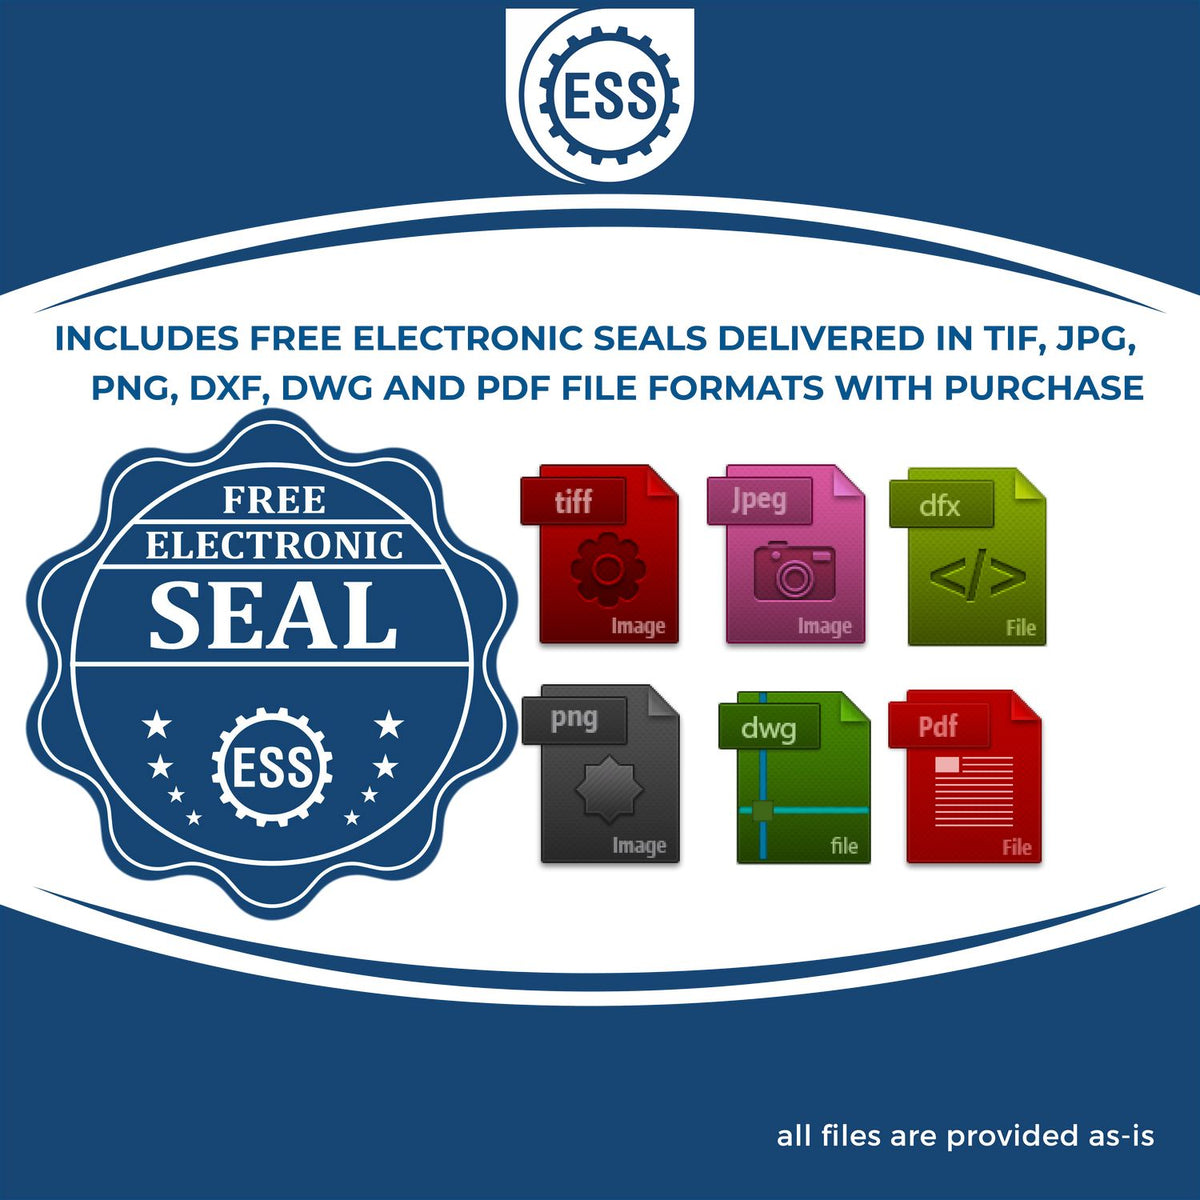 An infographic for the free electronic seal for the Gift North Dakota Land Surveyor Seal illustrating the different file type icons such as DXF, DWG, TIF, JPG and PNG.